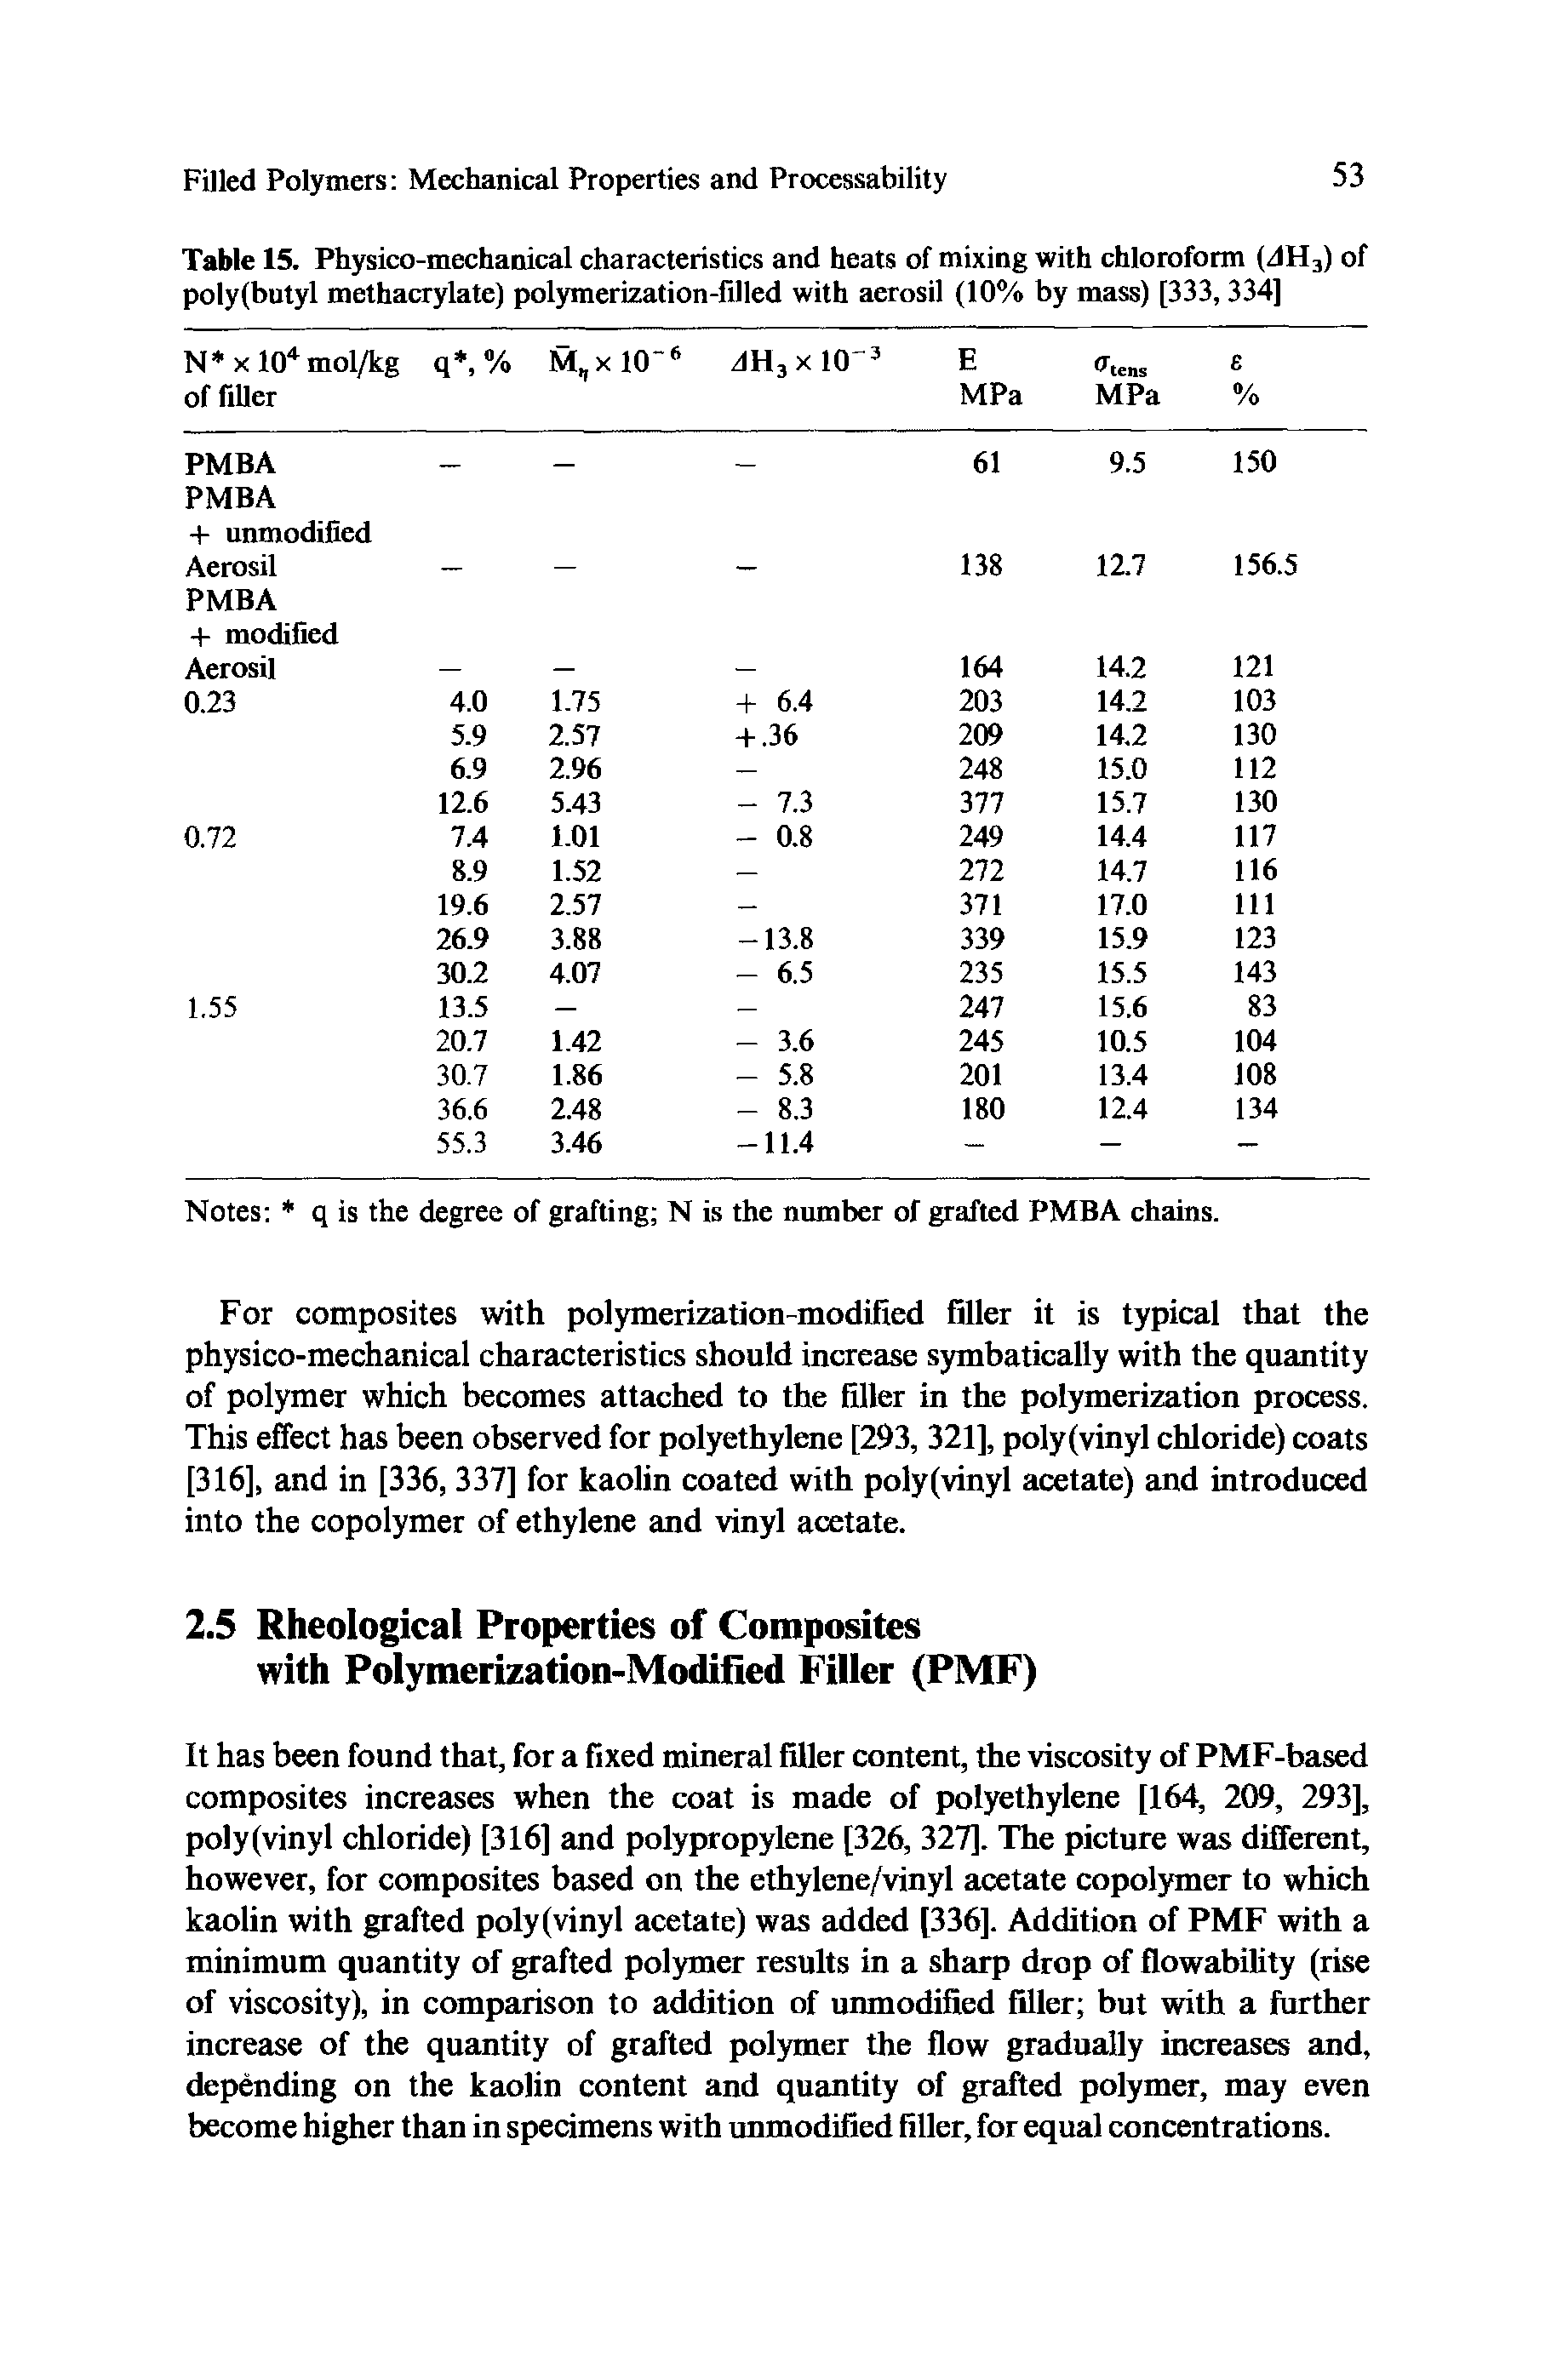 Table 15. Physico-mechanical characteristics and heats of mixing with chloroform (dH3) of poly(butyl methacrylate) polymerization-filled with aerosil (10% by mass) [333, 334]...